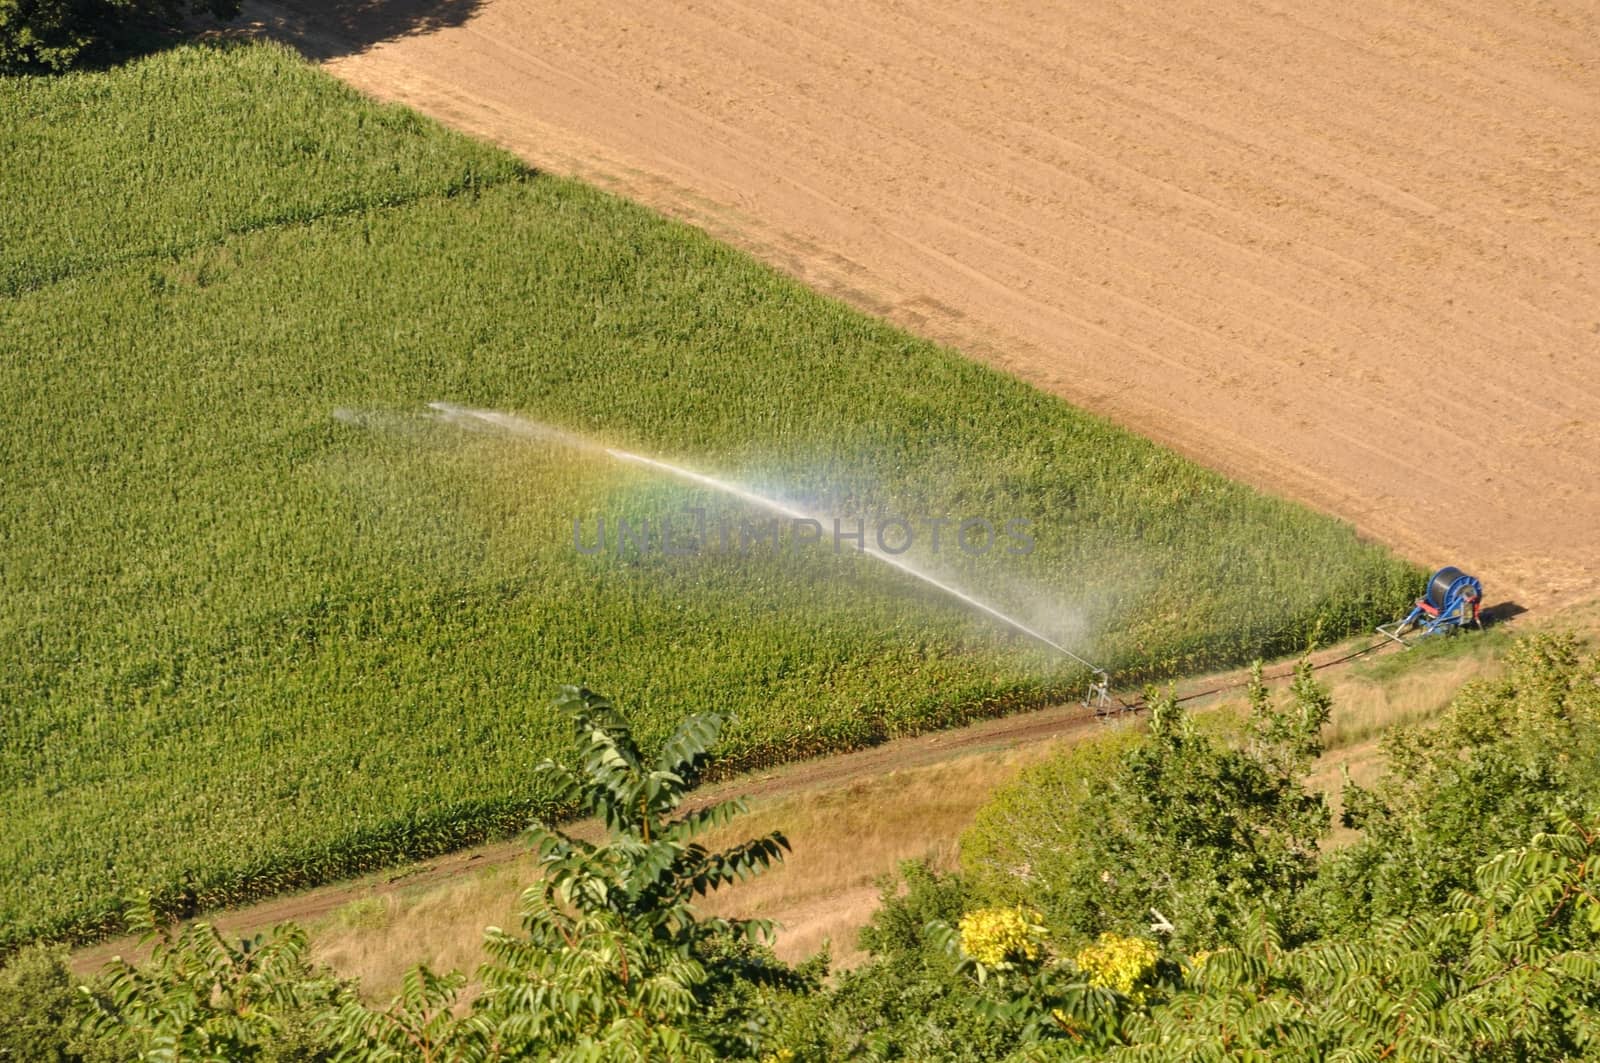 Water sprinkler installation in a field of maize, aerial view